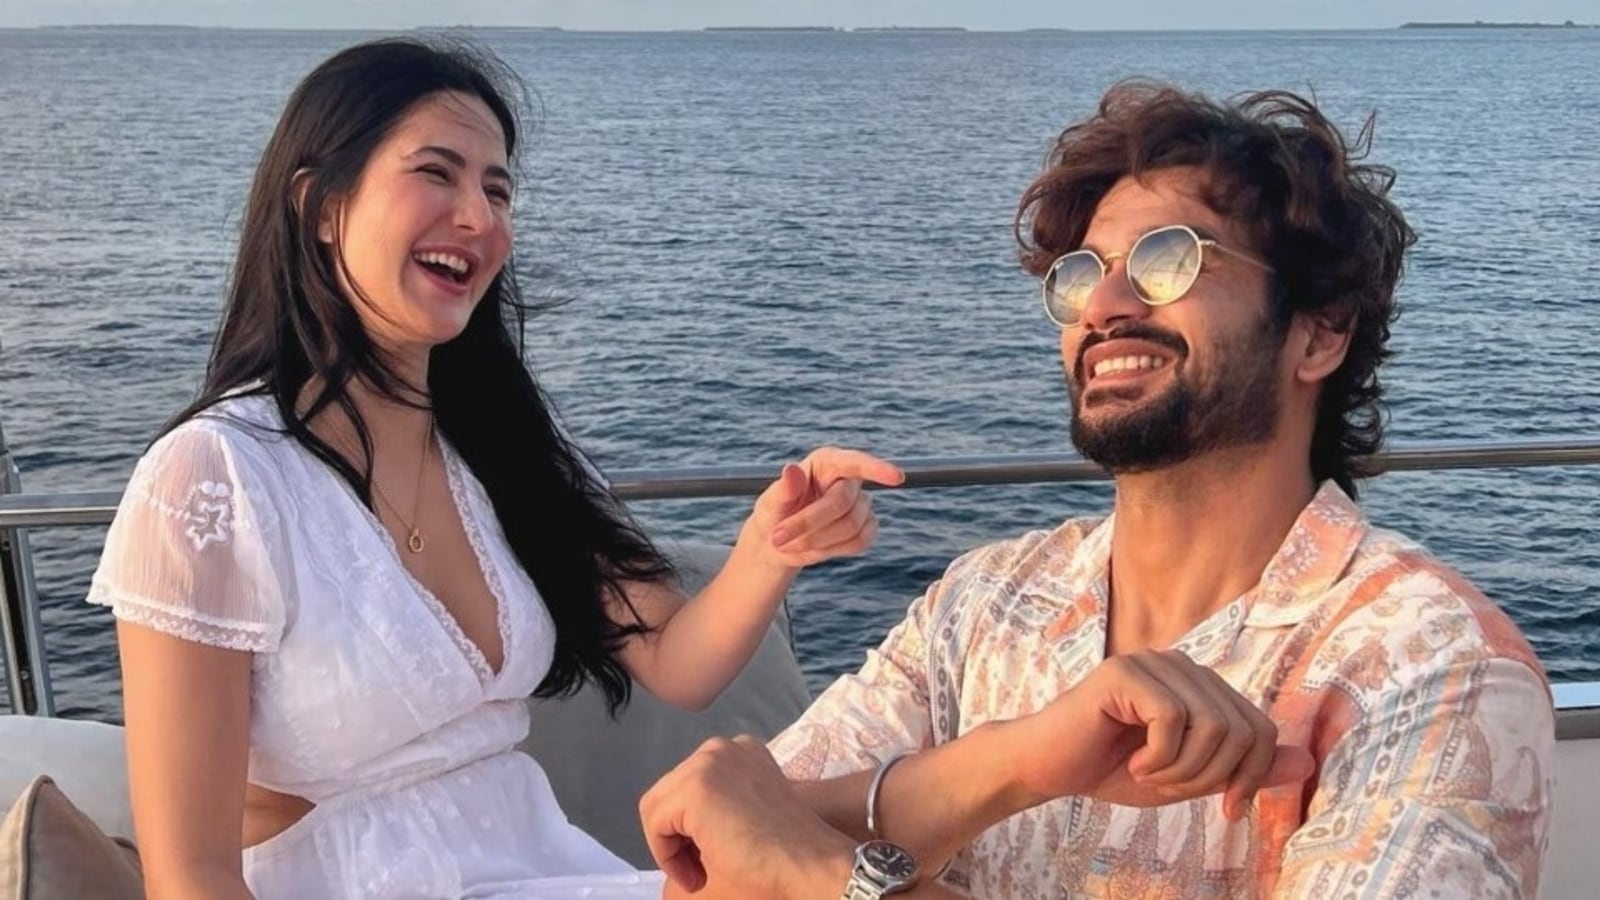 Katrina Kaif looks stunning in white dress as she chills with Sunny Kaushal during Maldives birthday trip: All pics | Fashion Trends - Hindustan Times